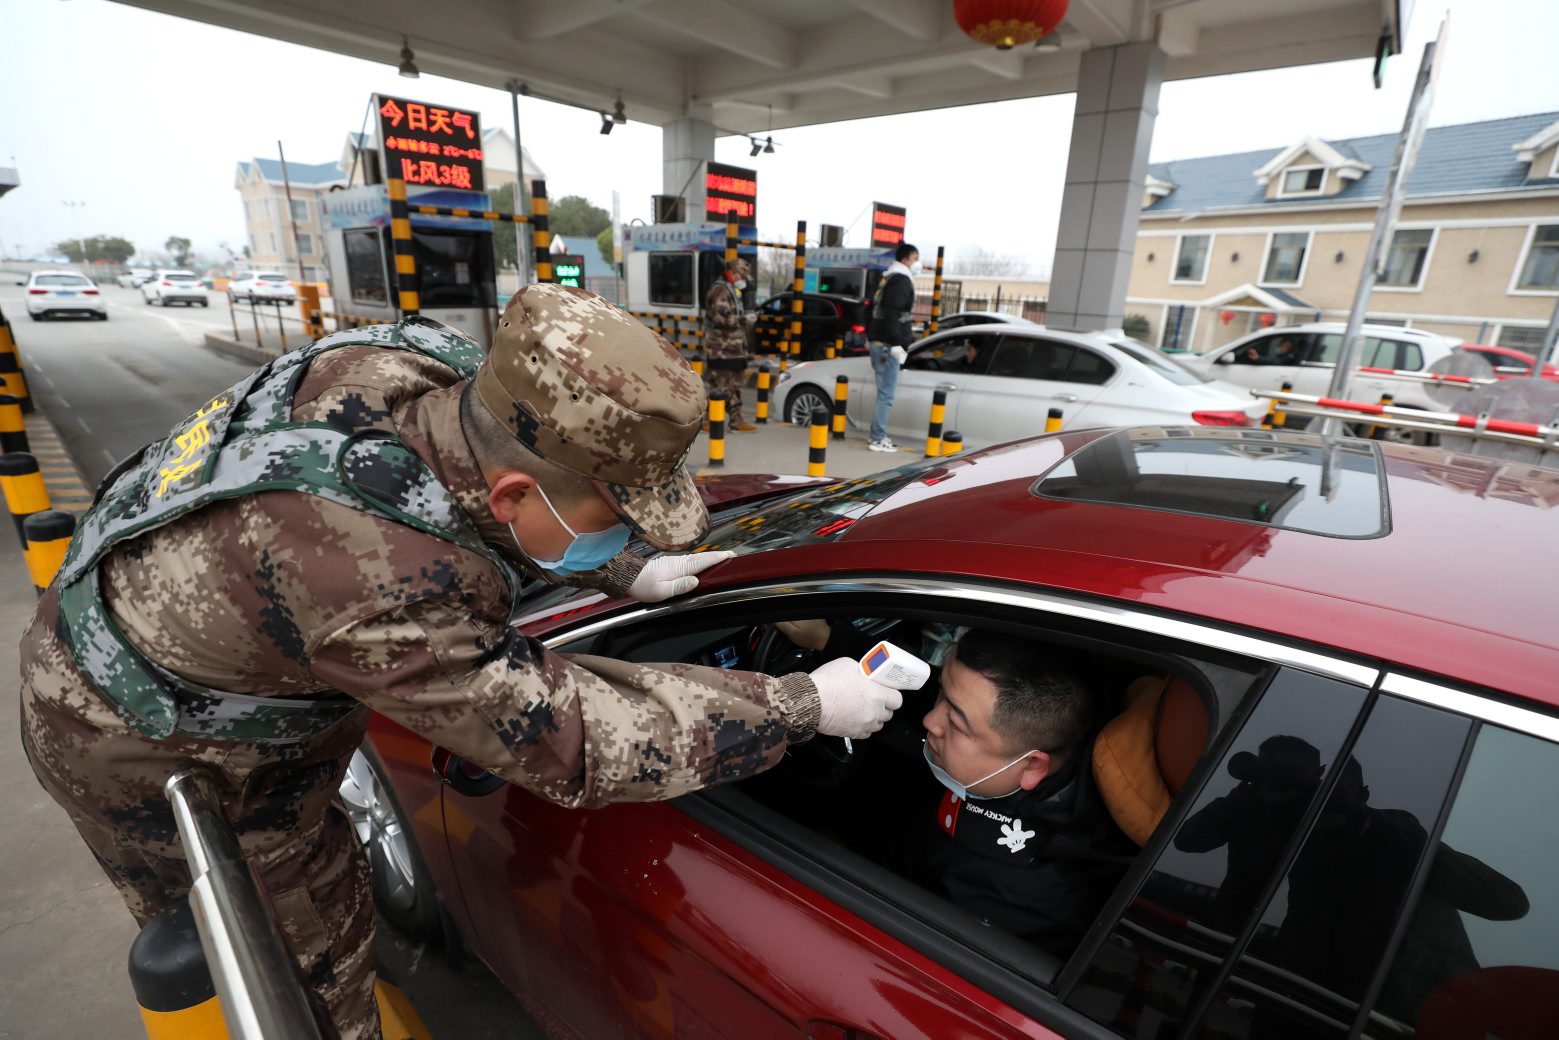 epa08155521 A militia member checks the body temperature of a driver on a vehicle at an expressway toll gate in Wuhan in central China's Hubei province, 23 January 2020, in a bid to contain the spread of the new coronavirus.  EPA/YUAN ZHENG CHINA OUT CHINA WUHAN FEVER CHECK